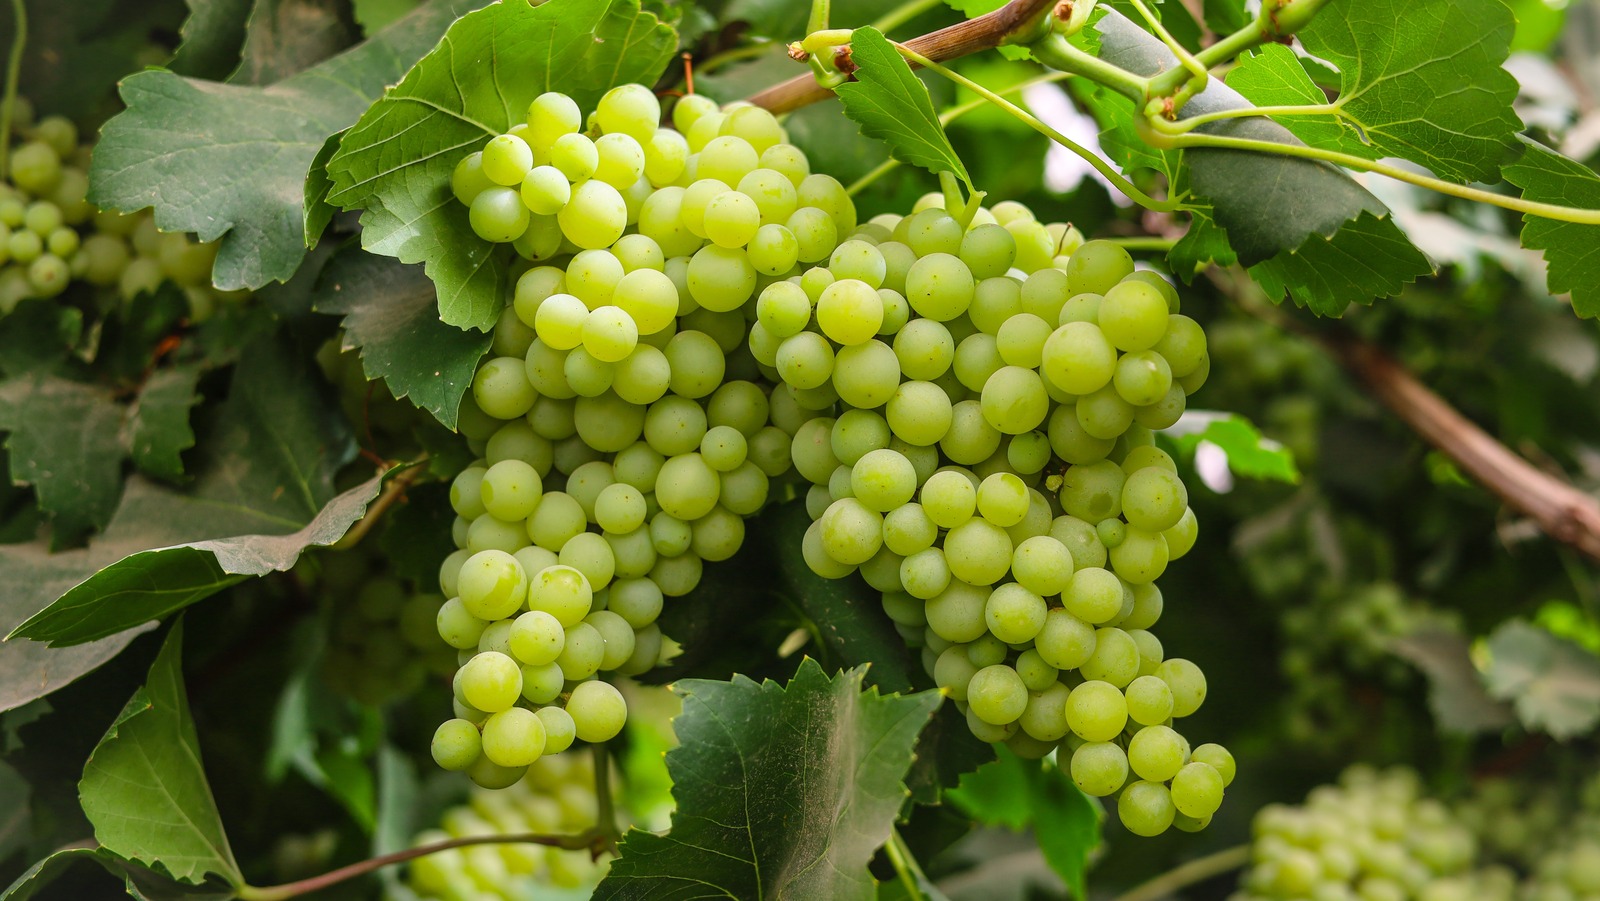 Green Grapes Images